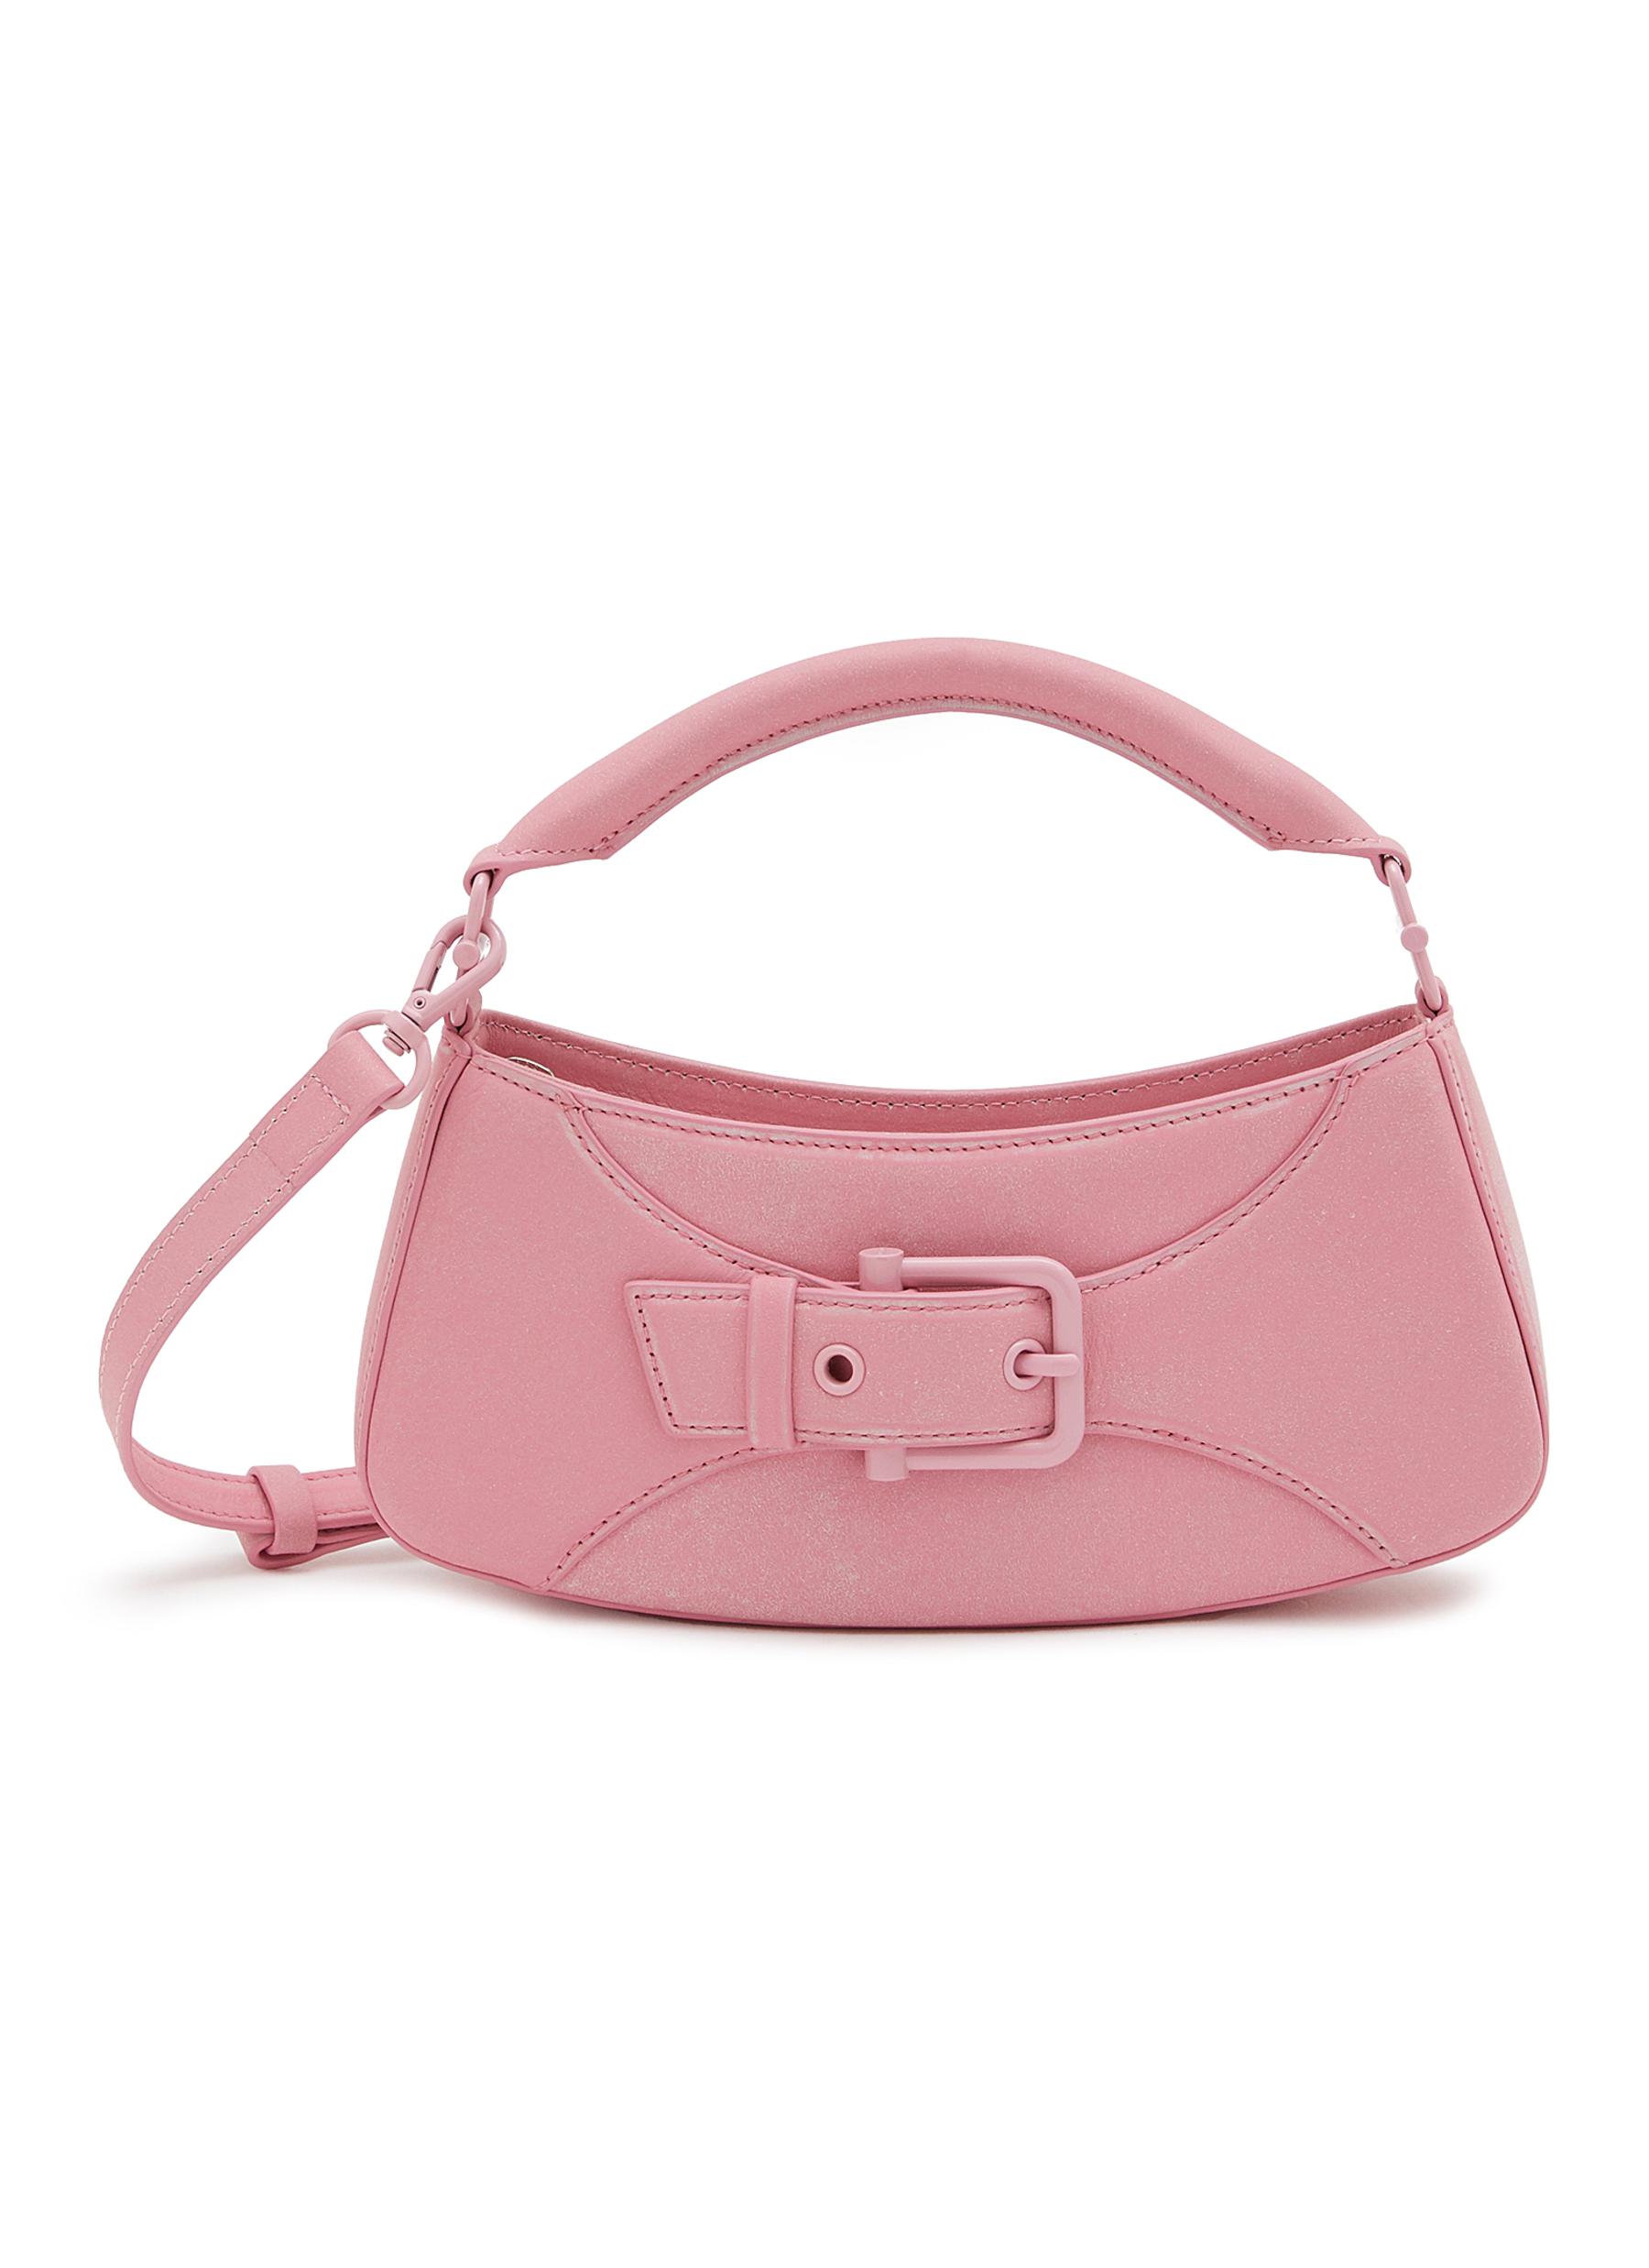 OSOI Belted Brocle Micro Bag in Pink Leather